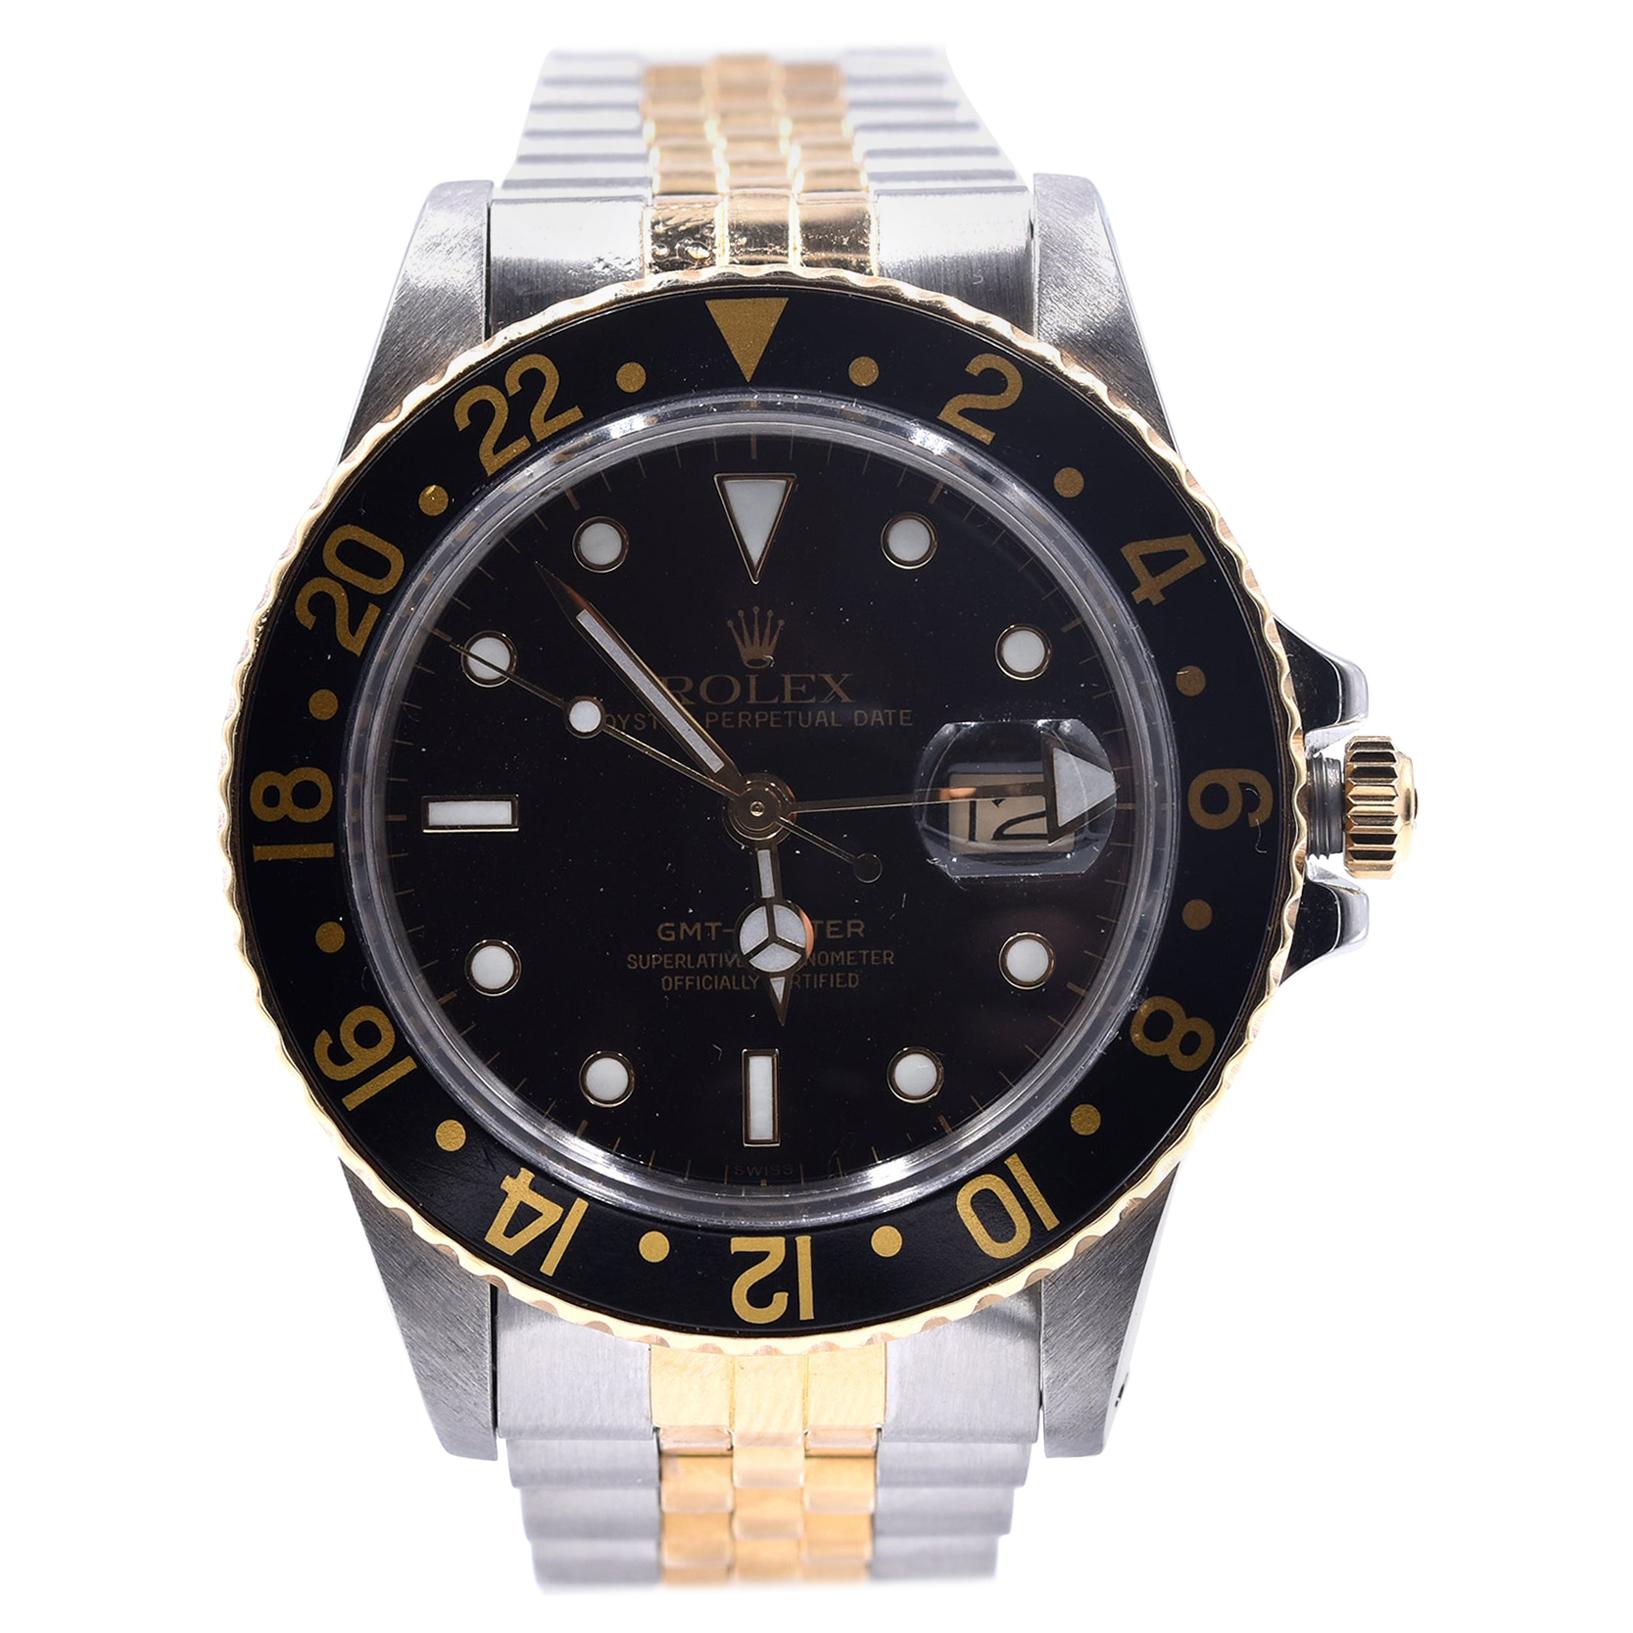 Rolex GMT Master Two-Tone Black Dial Watch Ref 16753